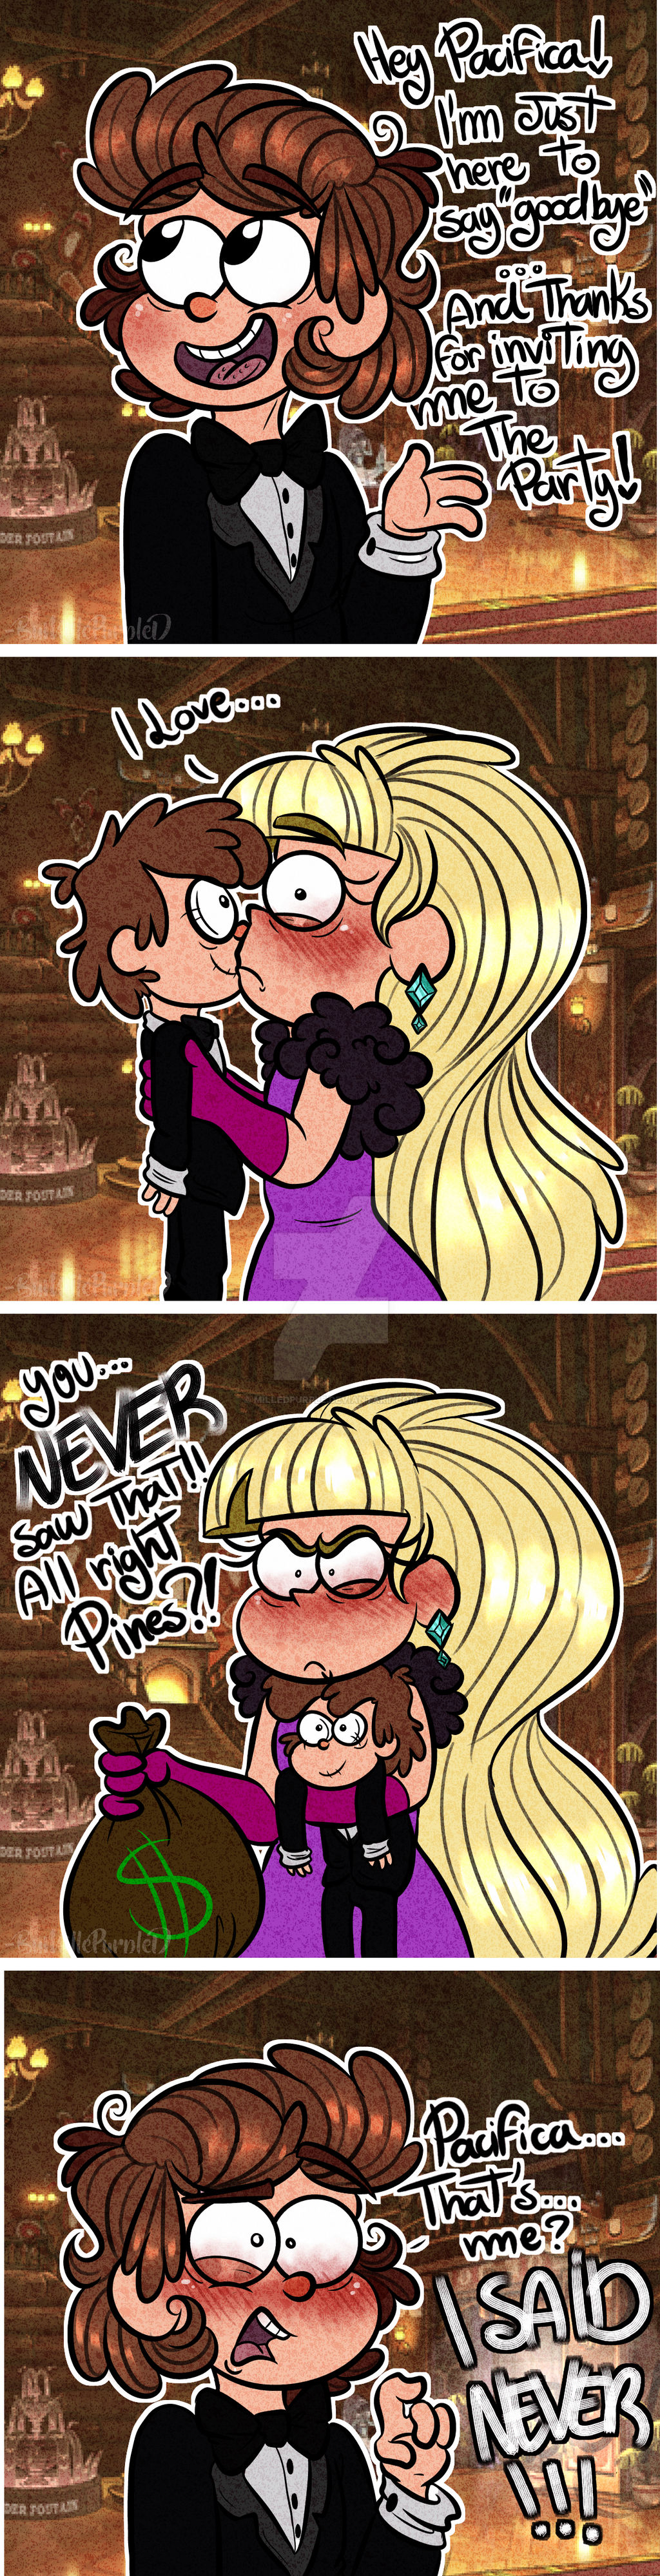 Comic You Never Saw That Shut Up By Milledpurple On Deviantart